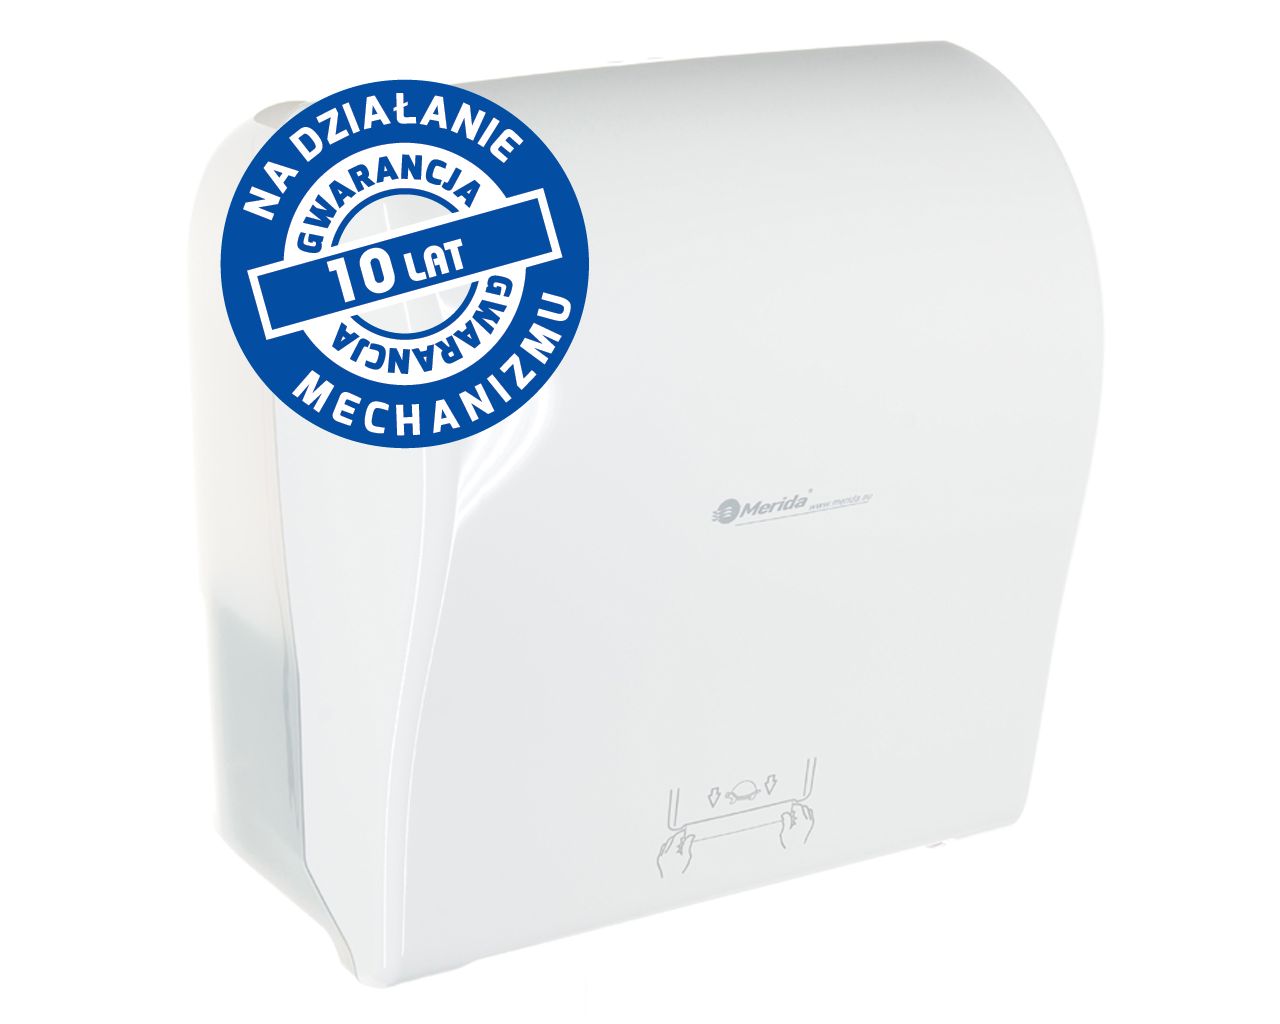 MERIDA SOLID CUT mechanical roll towel dispenser merida solid cut white with high gloss finish